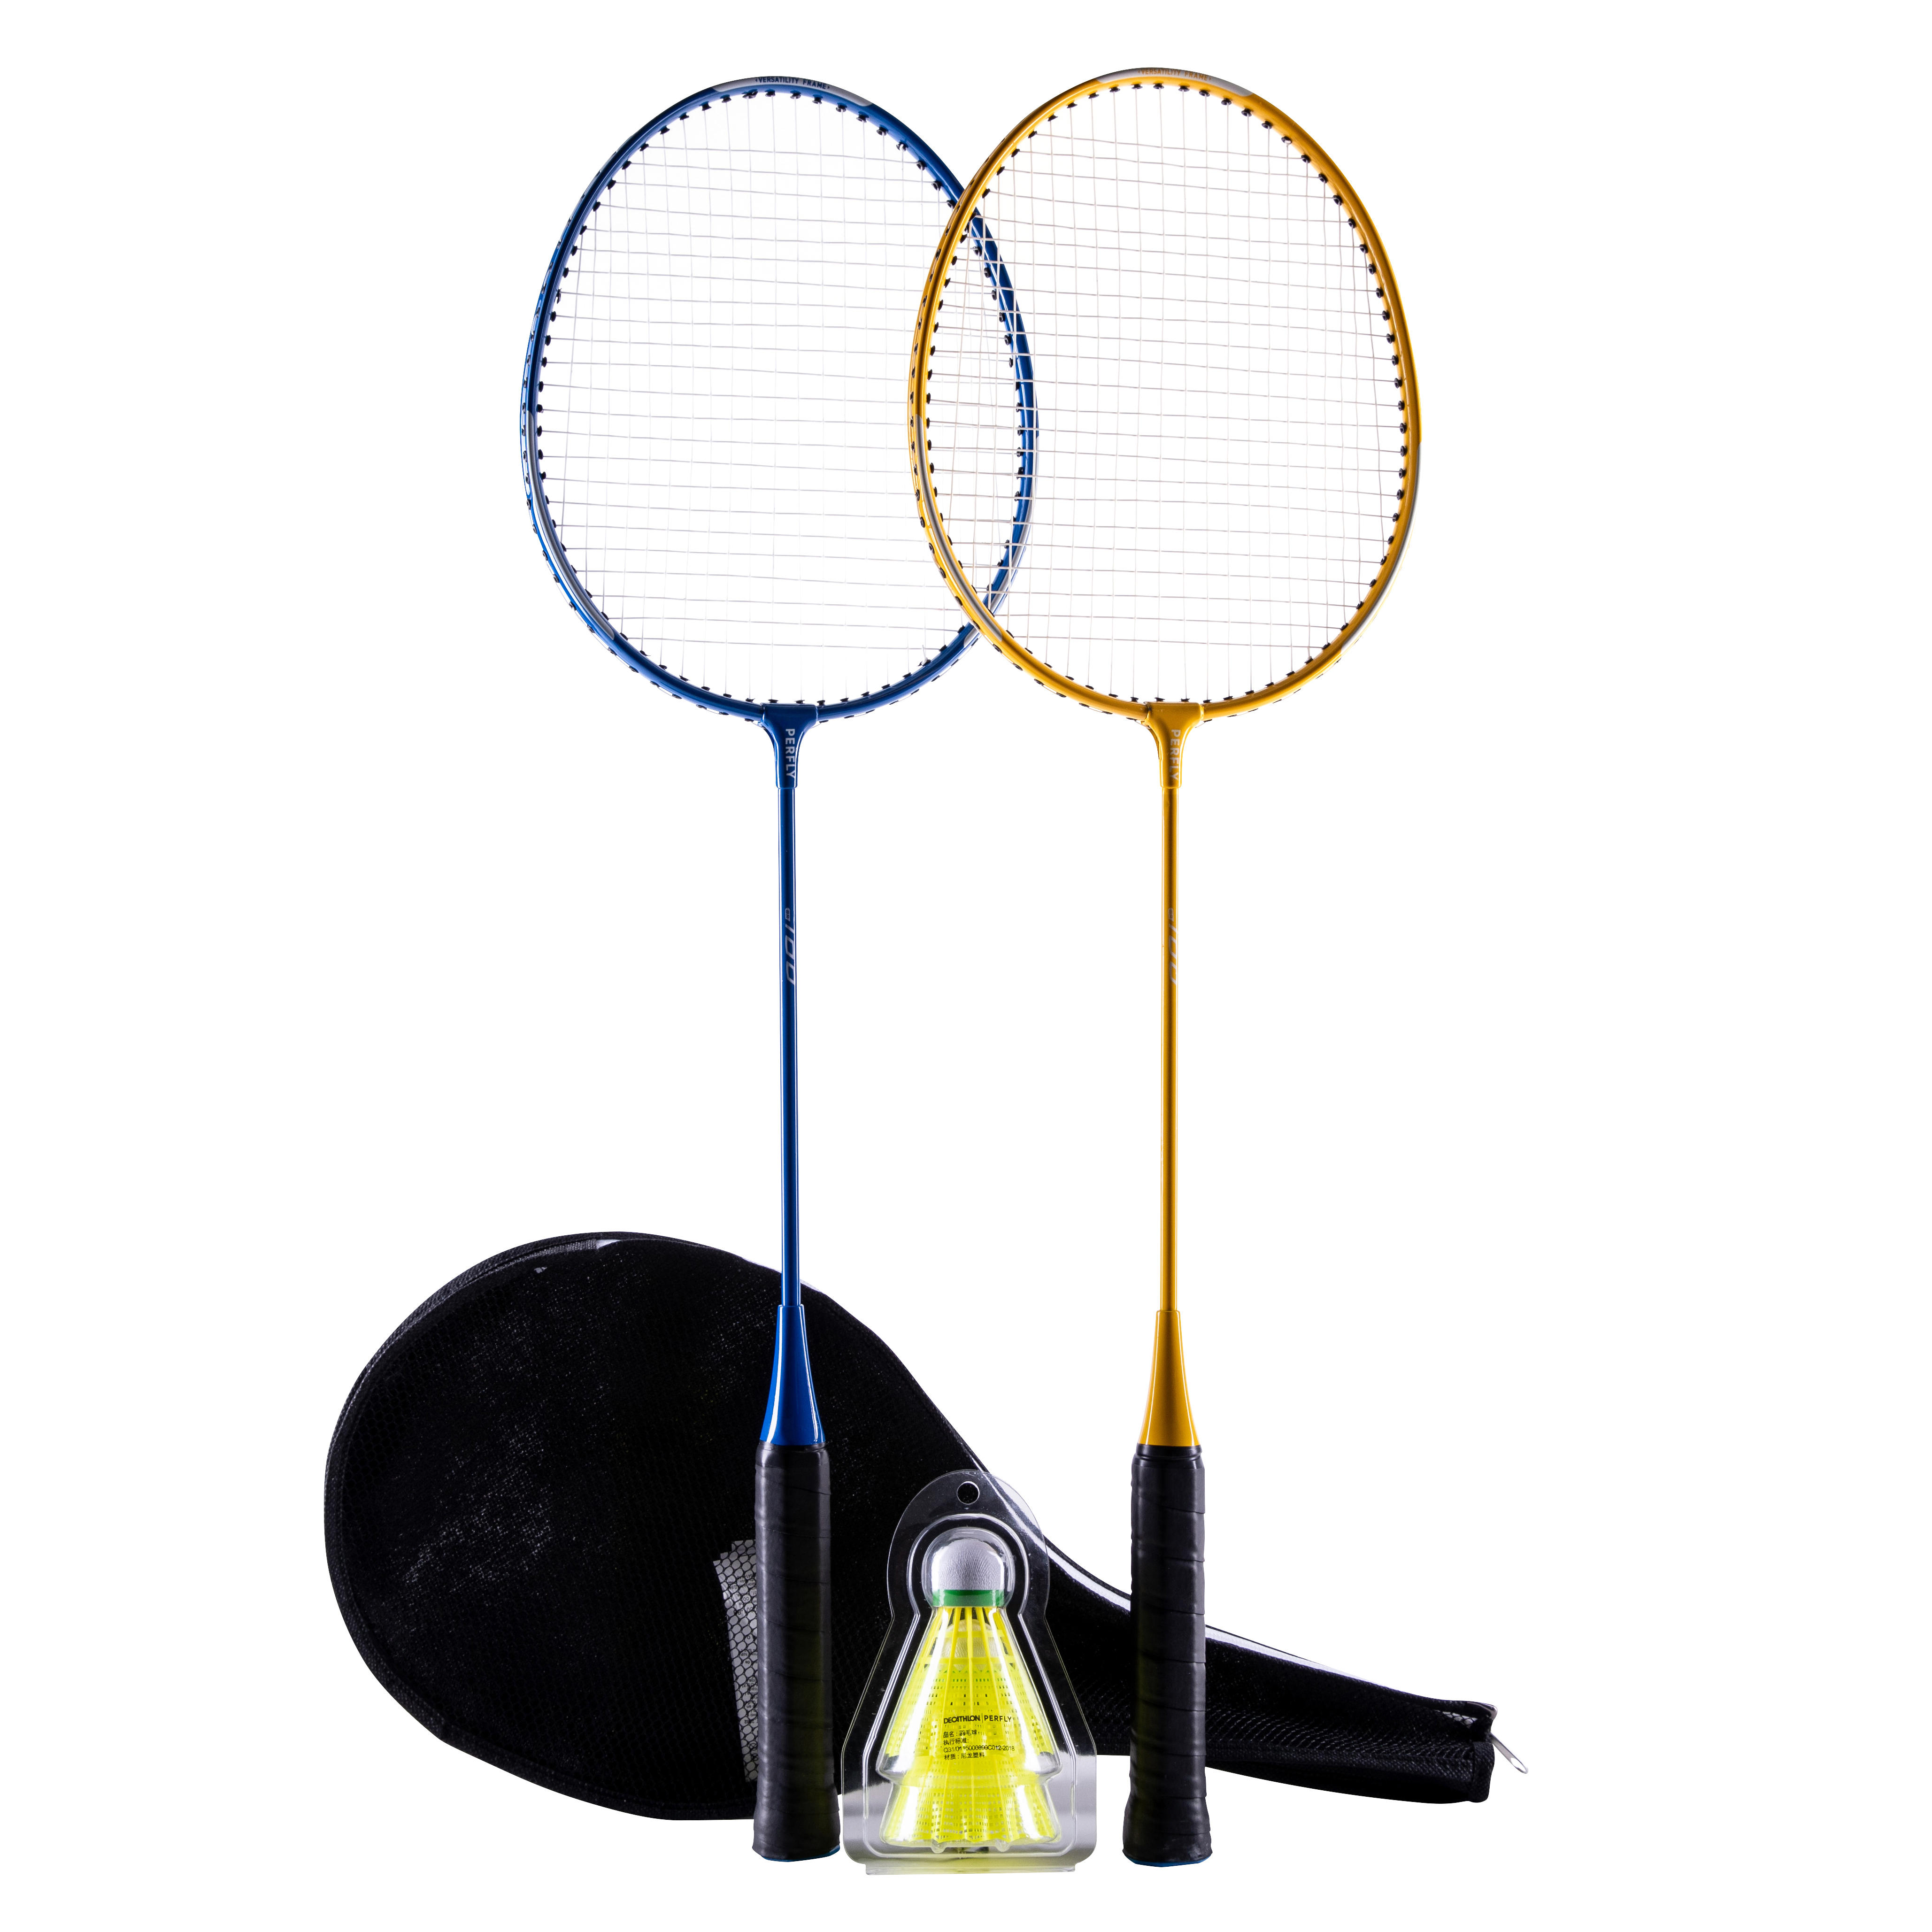 4 Player Badminton Rackets with Six Shuttlecocks for Kid Adult Complete Shuttlecock Kit ideal for Family Outdoor Games trounistro Badminton Set with Net 